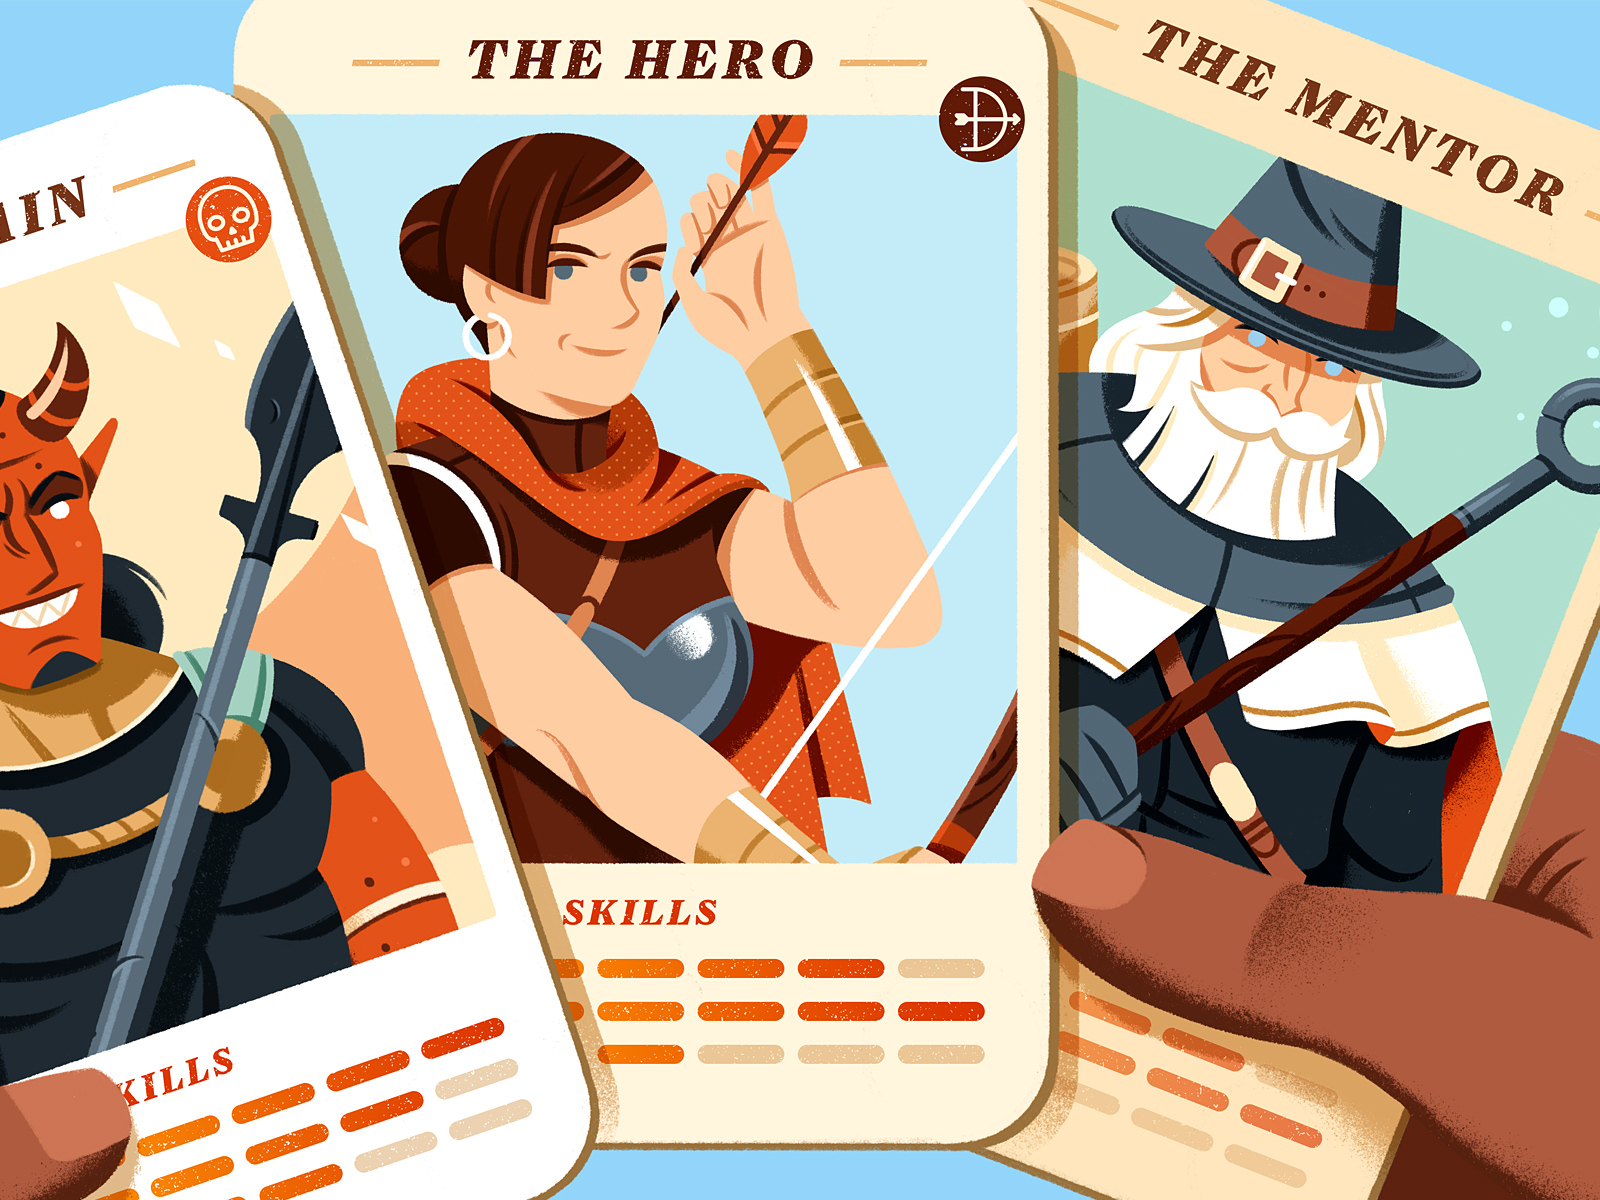 character-profile-template-by-ra-l-gil-for-reedsy-on-dribbble